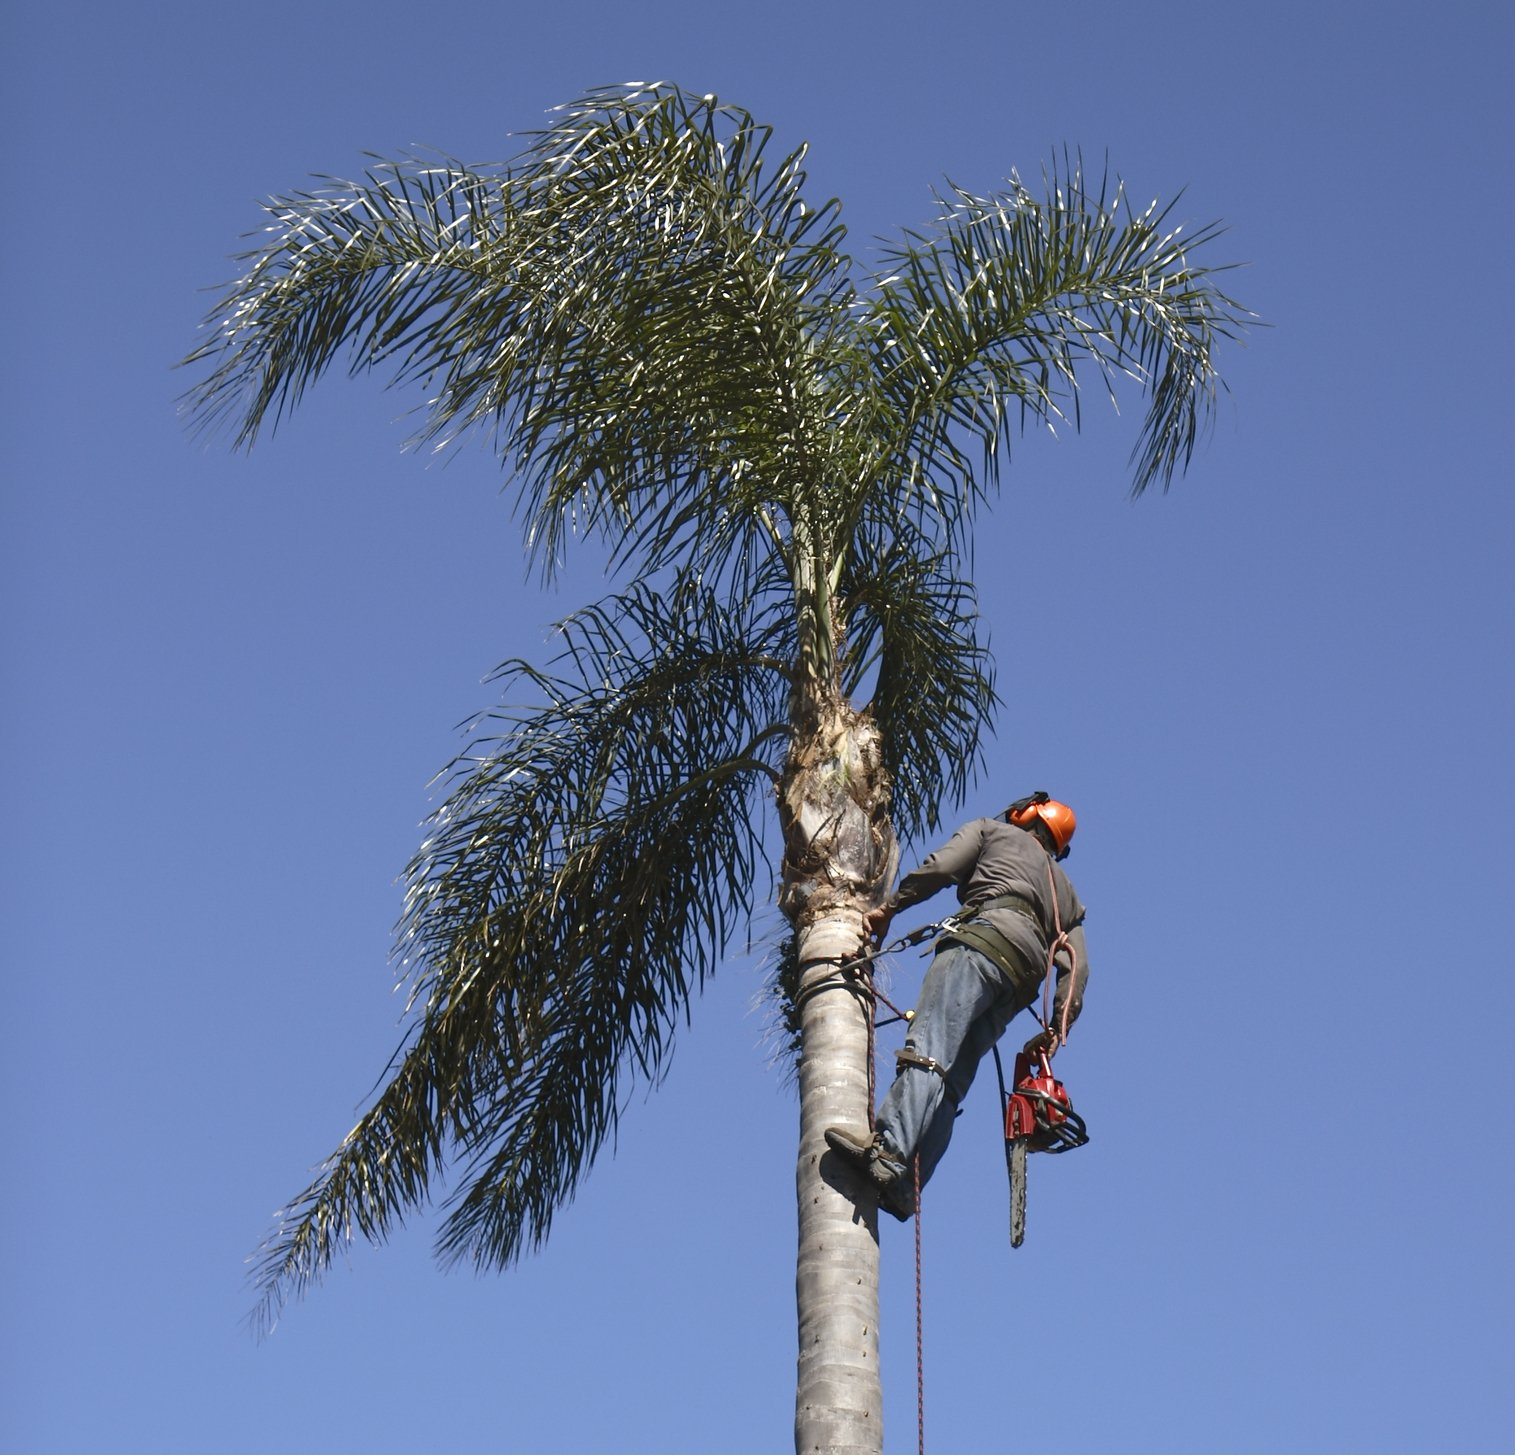 palm tree trimming being performed on a queen palm in Oakland Park FL